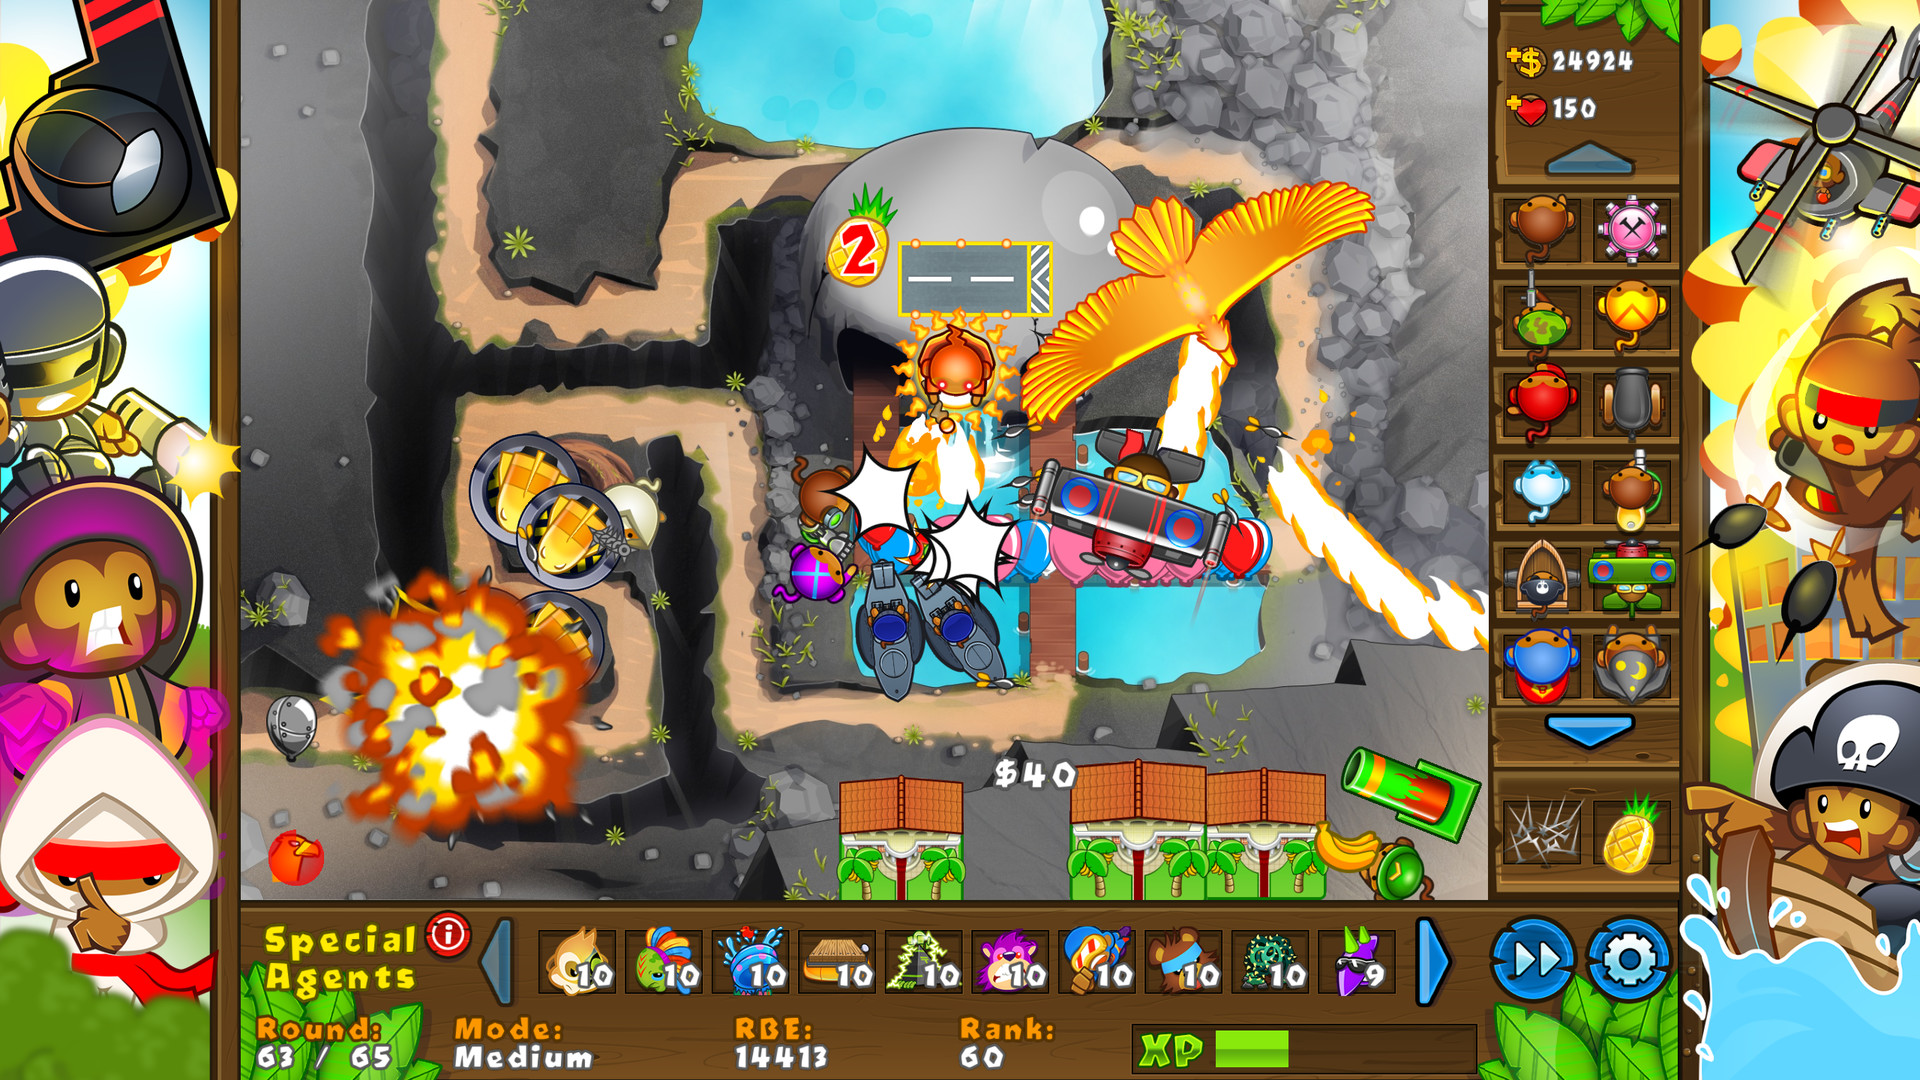 bloons tower defense 5 download windows